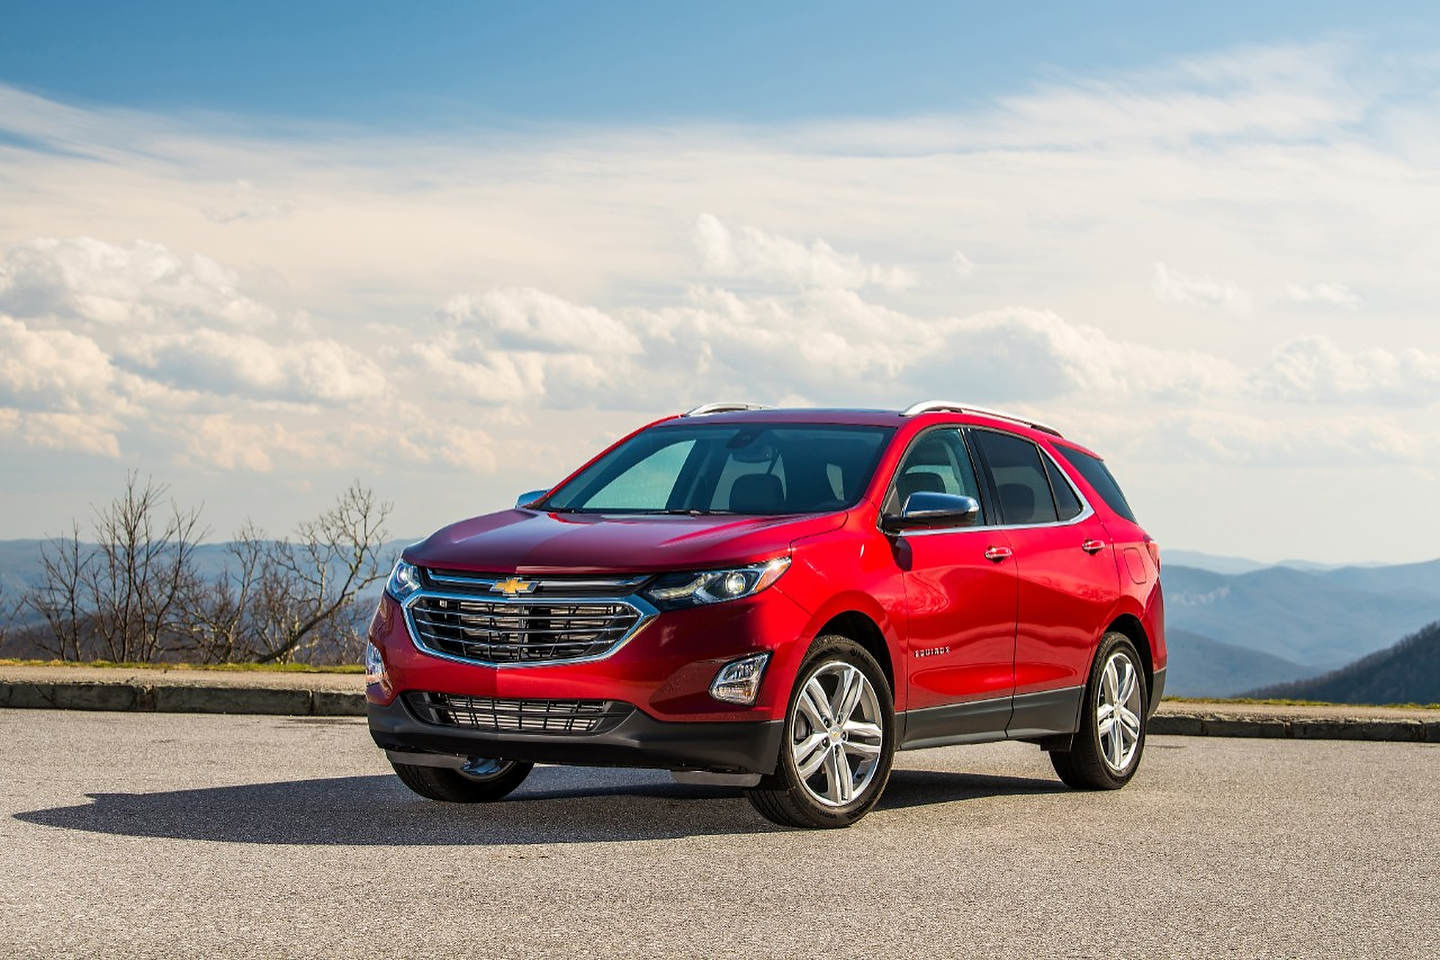 The 2021 Chevrolet Equinox has a lot to offer